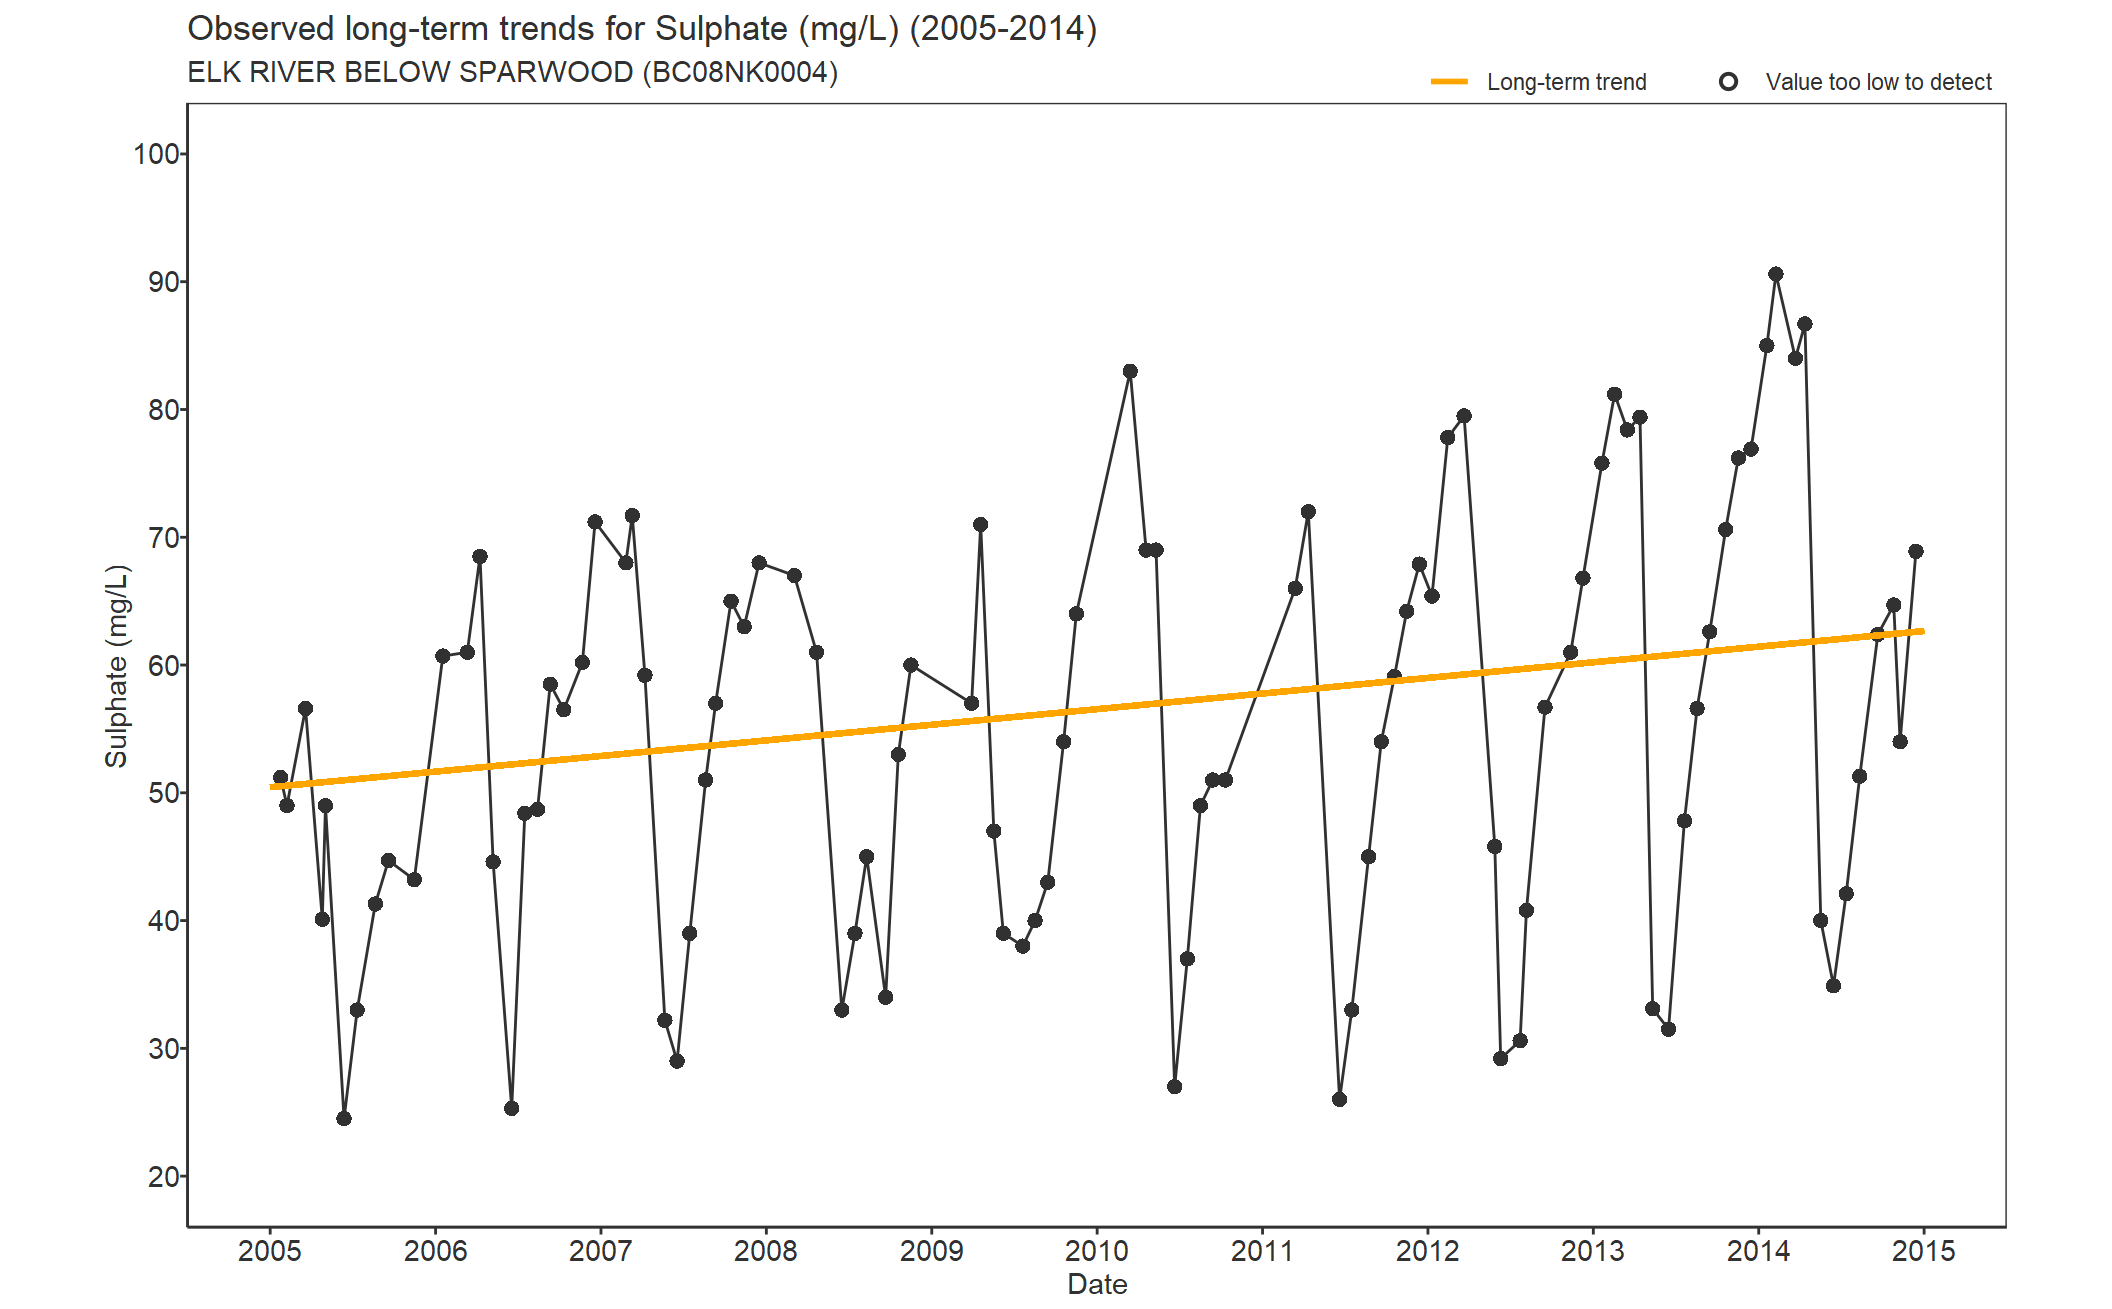 Observed long-term trends for Sulphate (2005-2014)